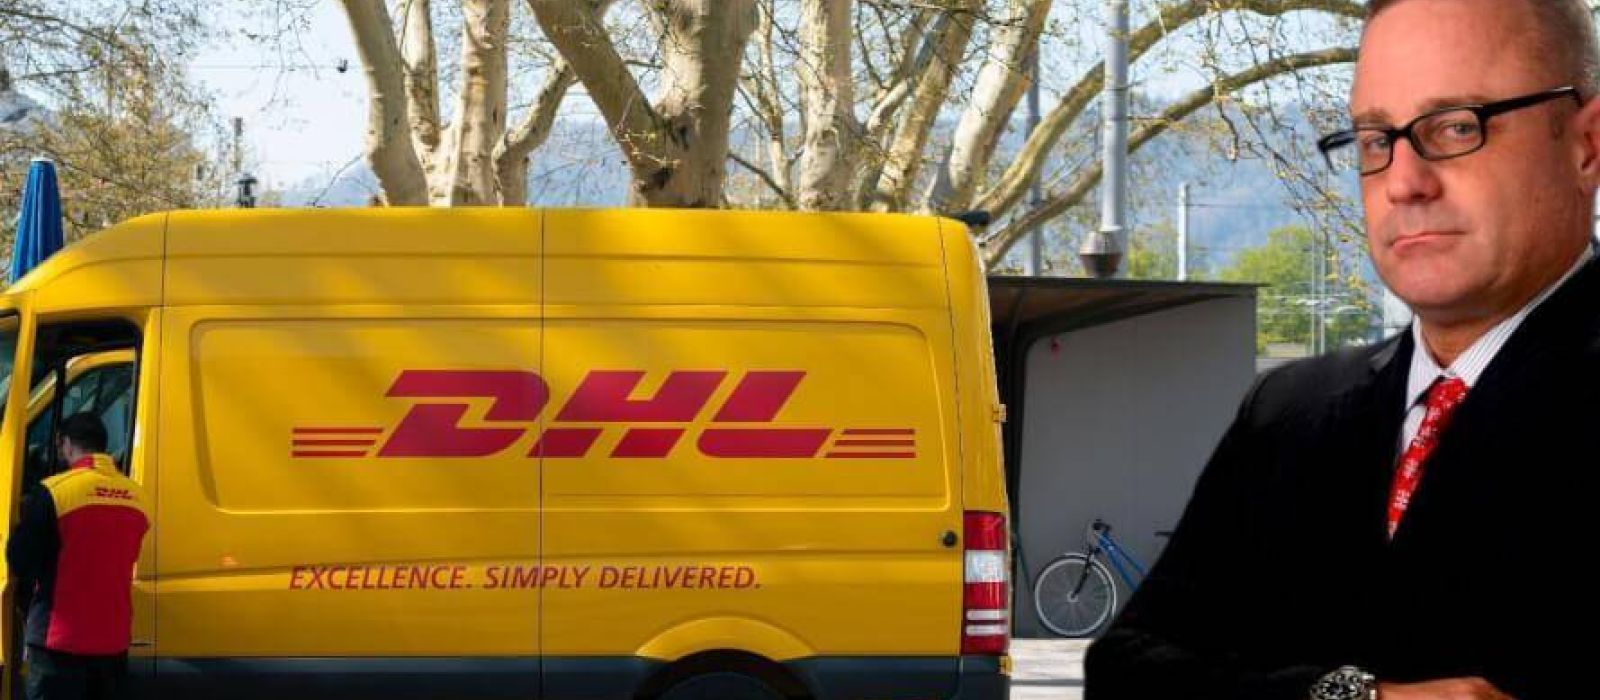 Top Los Angeles DHL delivery truck accident lawyers